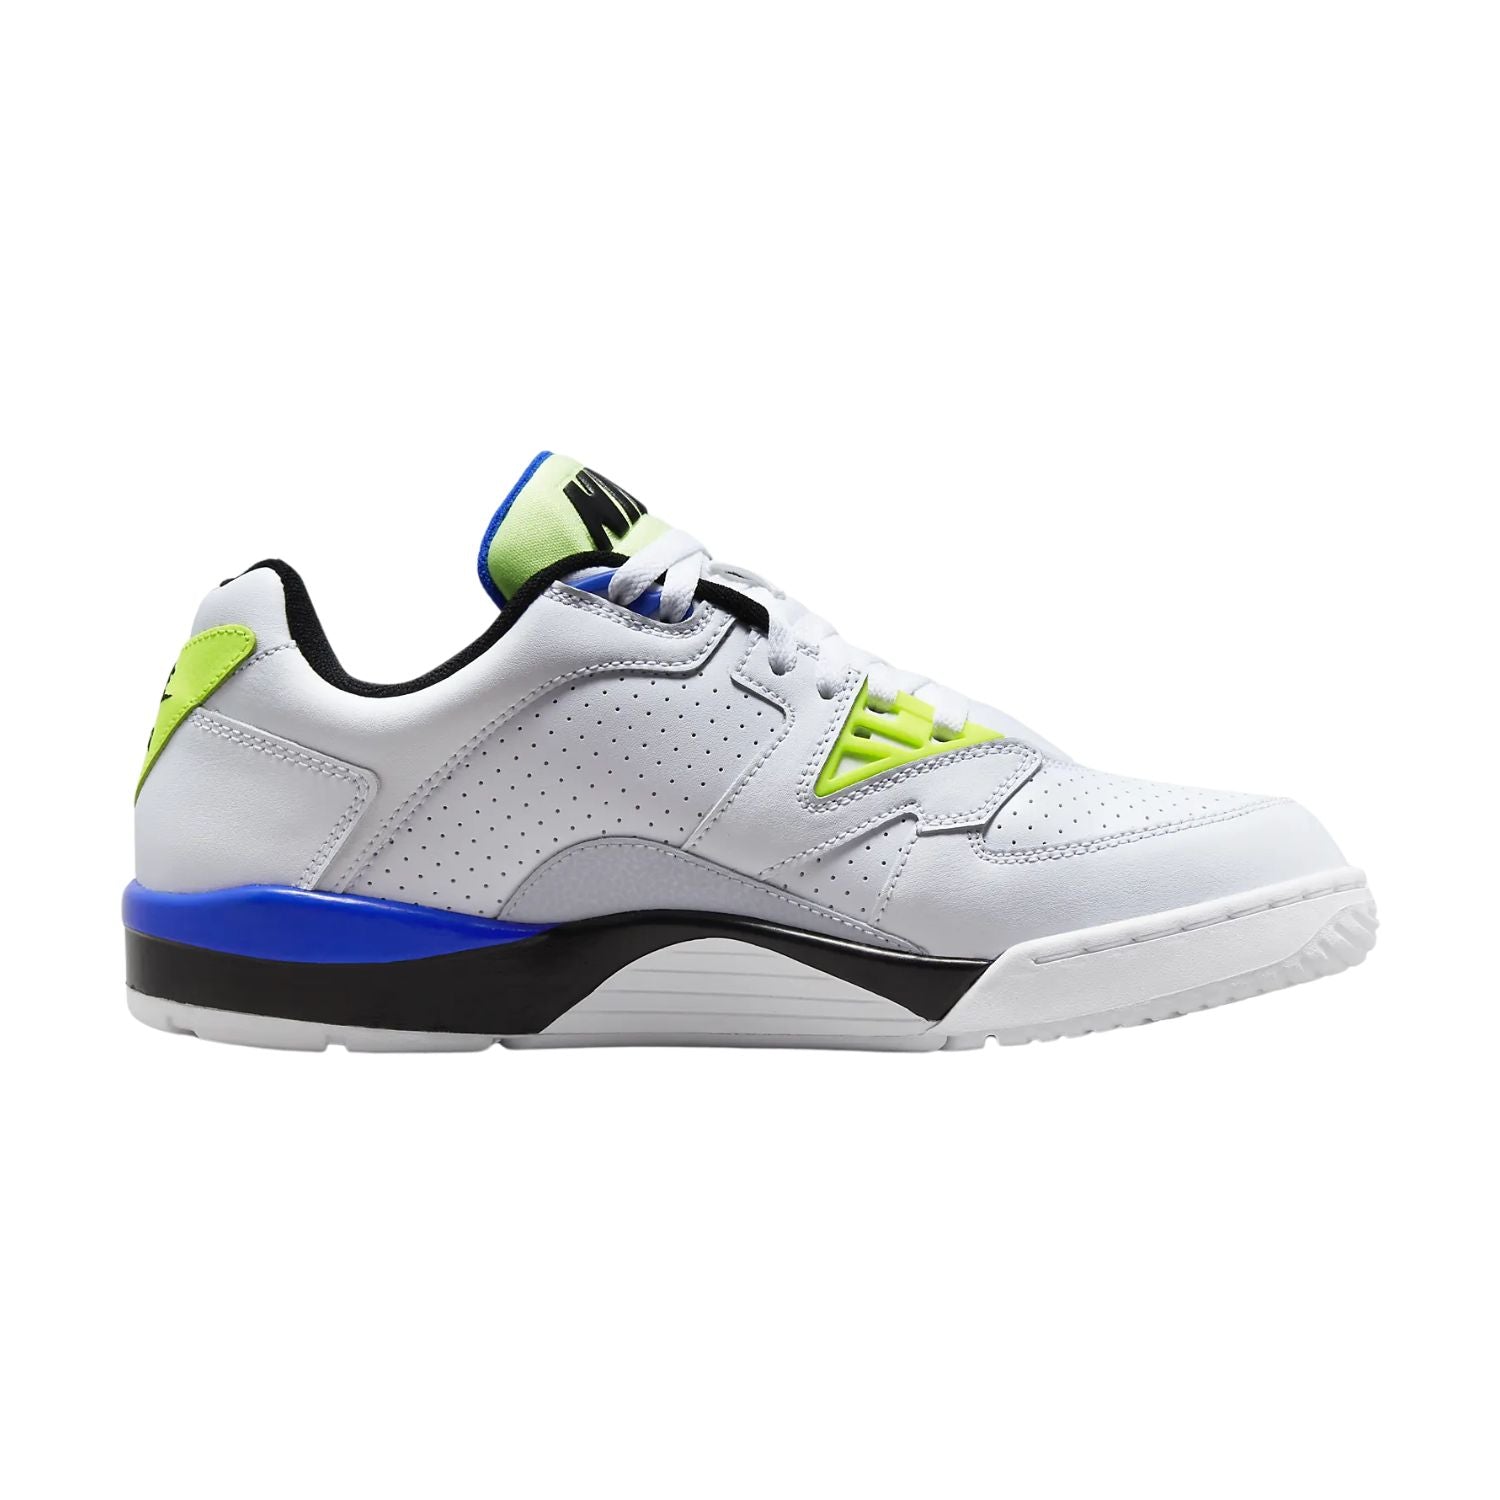 Nike Air Cross Trainer 3 Low Mens Style : Fd0788